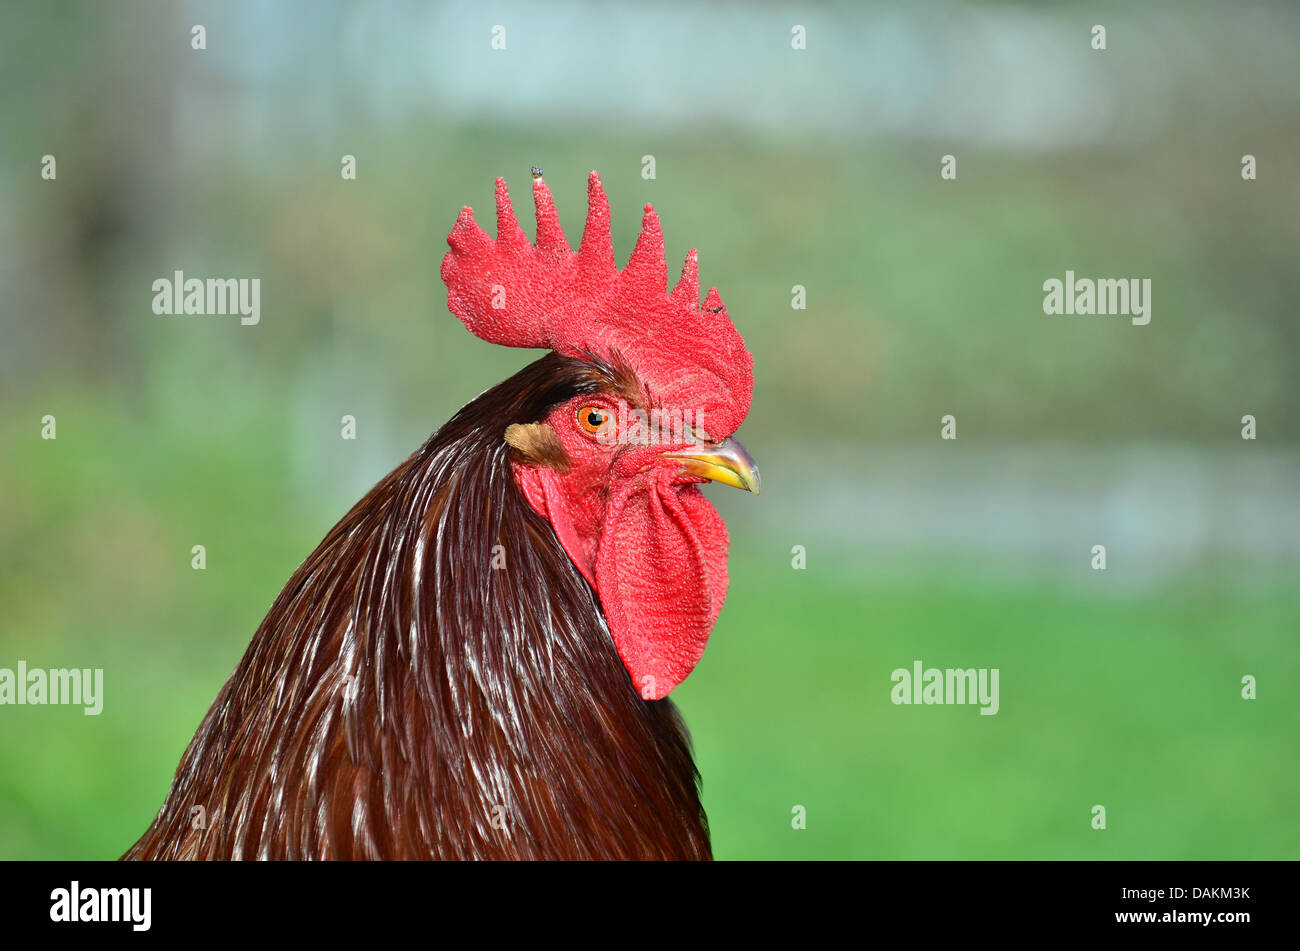 A Rhode Island Red rooster Stock Photo